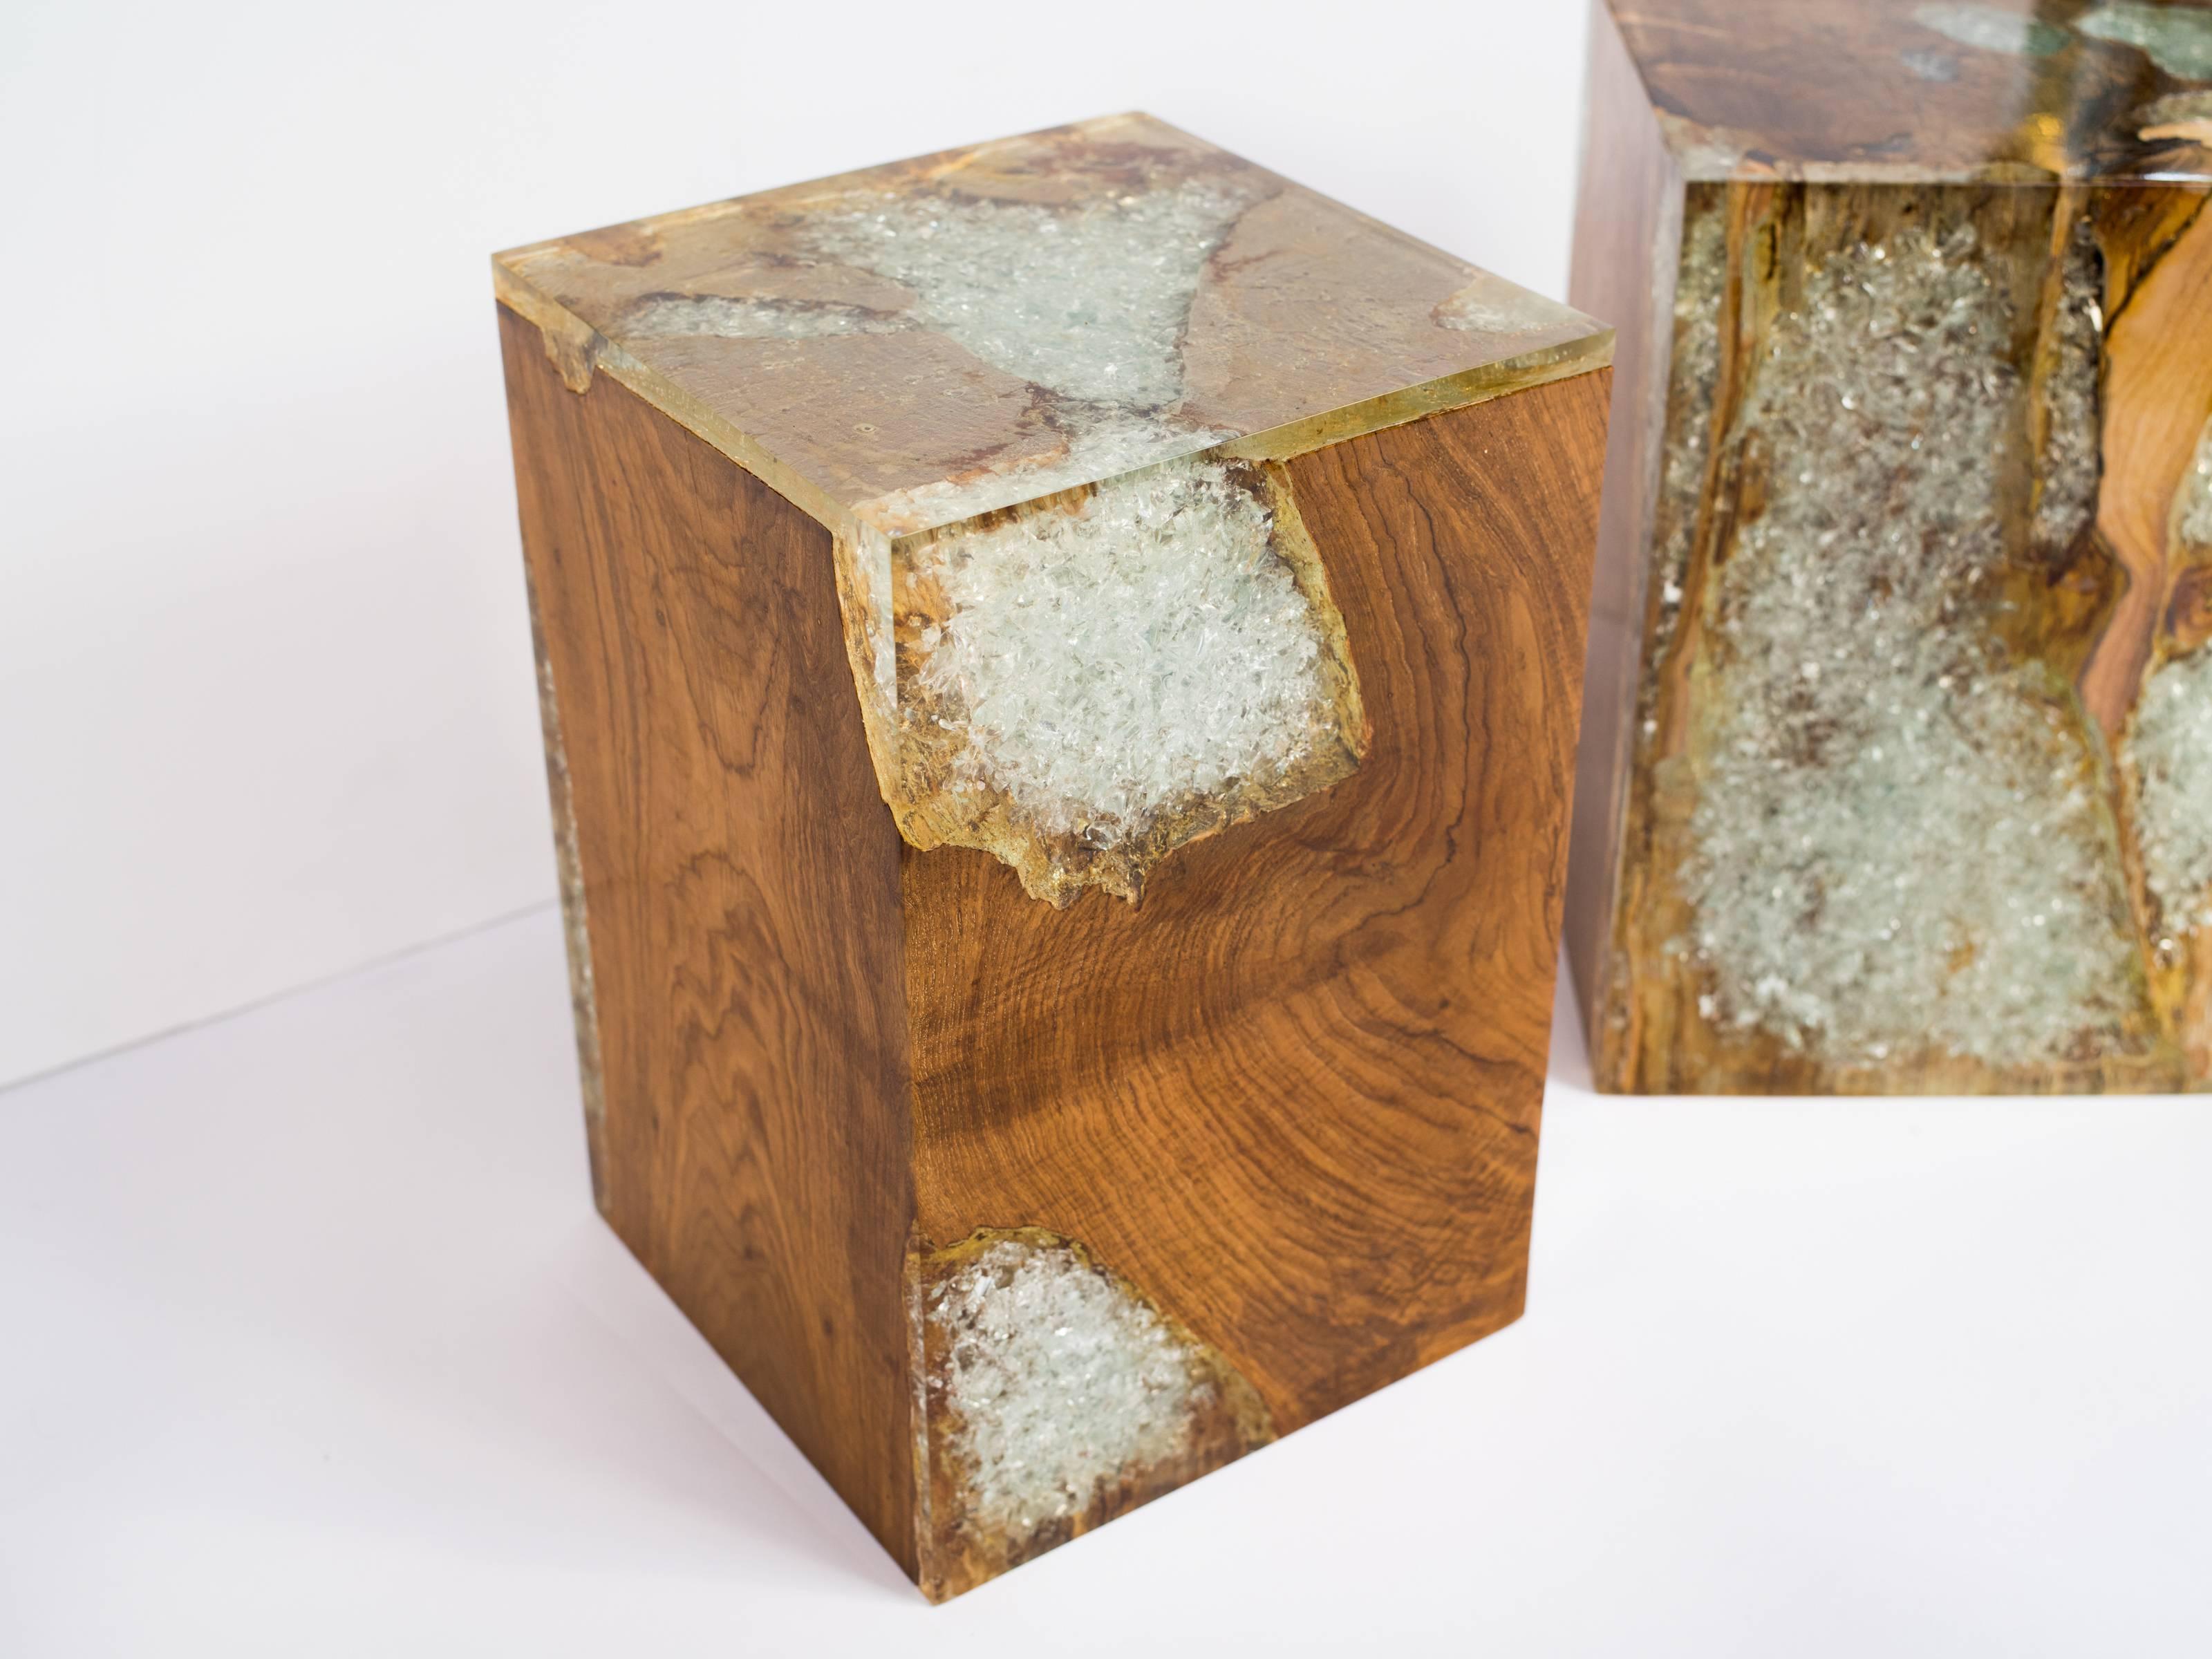 Pair of Bleached Teak Wood and Resin Side Tables or Stools, Indonesia For Sale 2